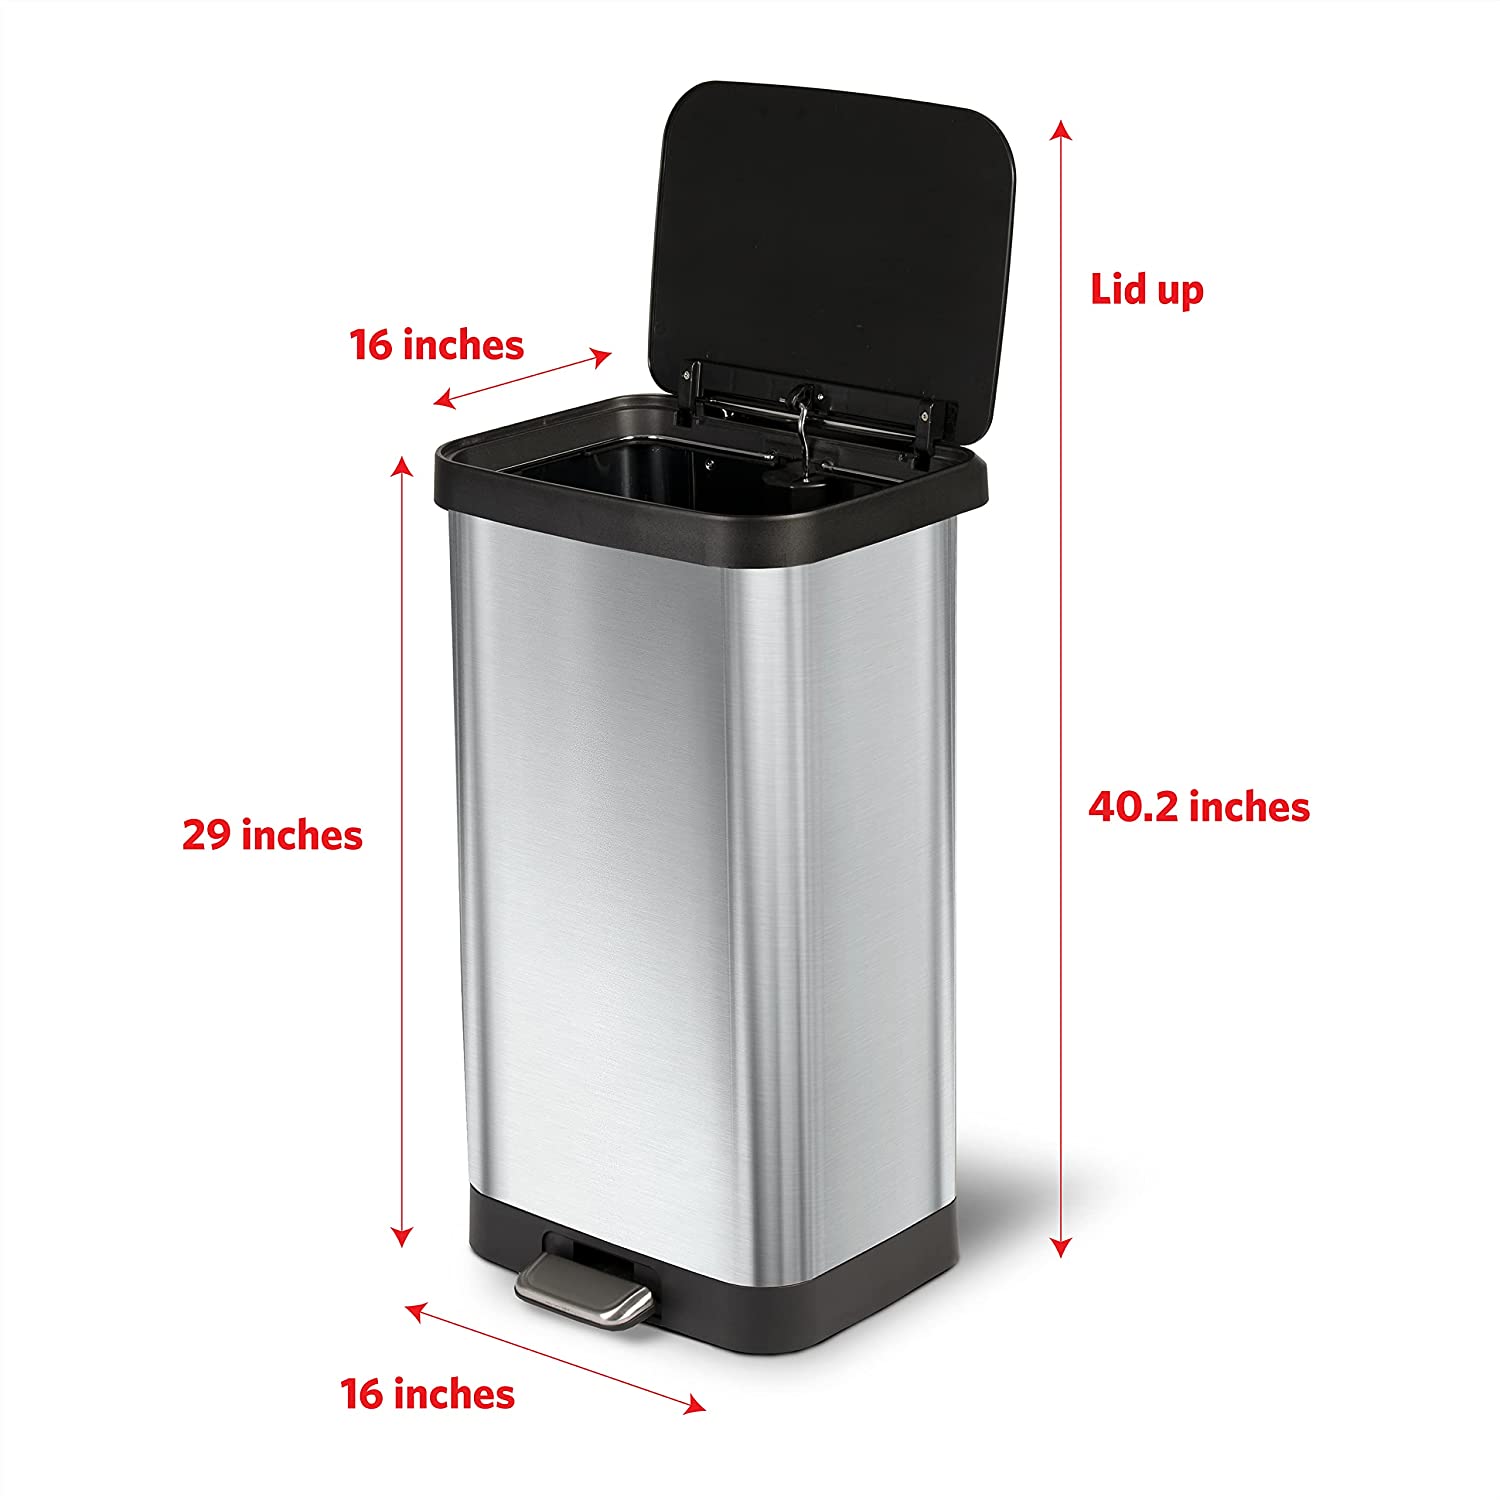 https://bigbigmart.com/wp-content/uploads/2023/05/Glad-Stainless-Steel-Step-Trash-Can-with-Clorox-Odor-Protection-Large-Metal-Kitchen-Garbage-Bin-with-Soft-Close-Lid-Foot-Pedal-and-Waste-Bag-Roll-Holder-20-Gallon-Stainless1.jpg